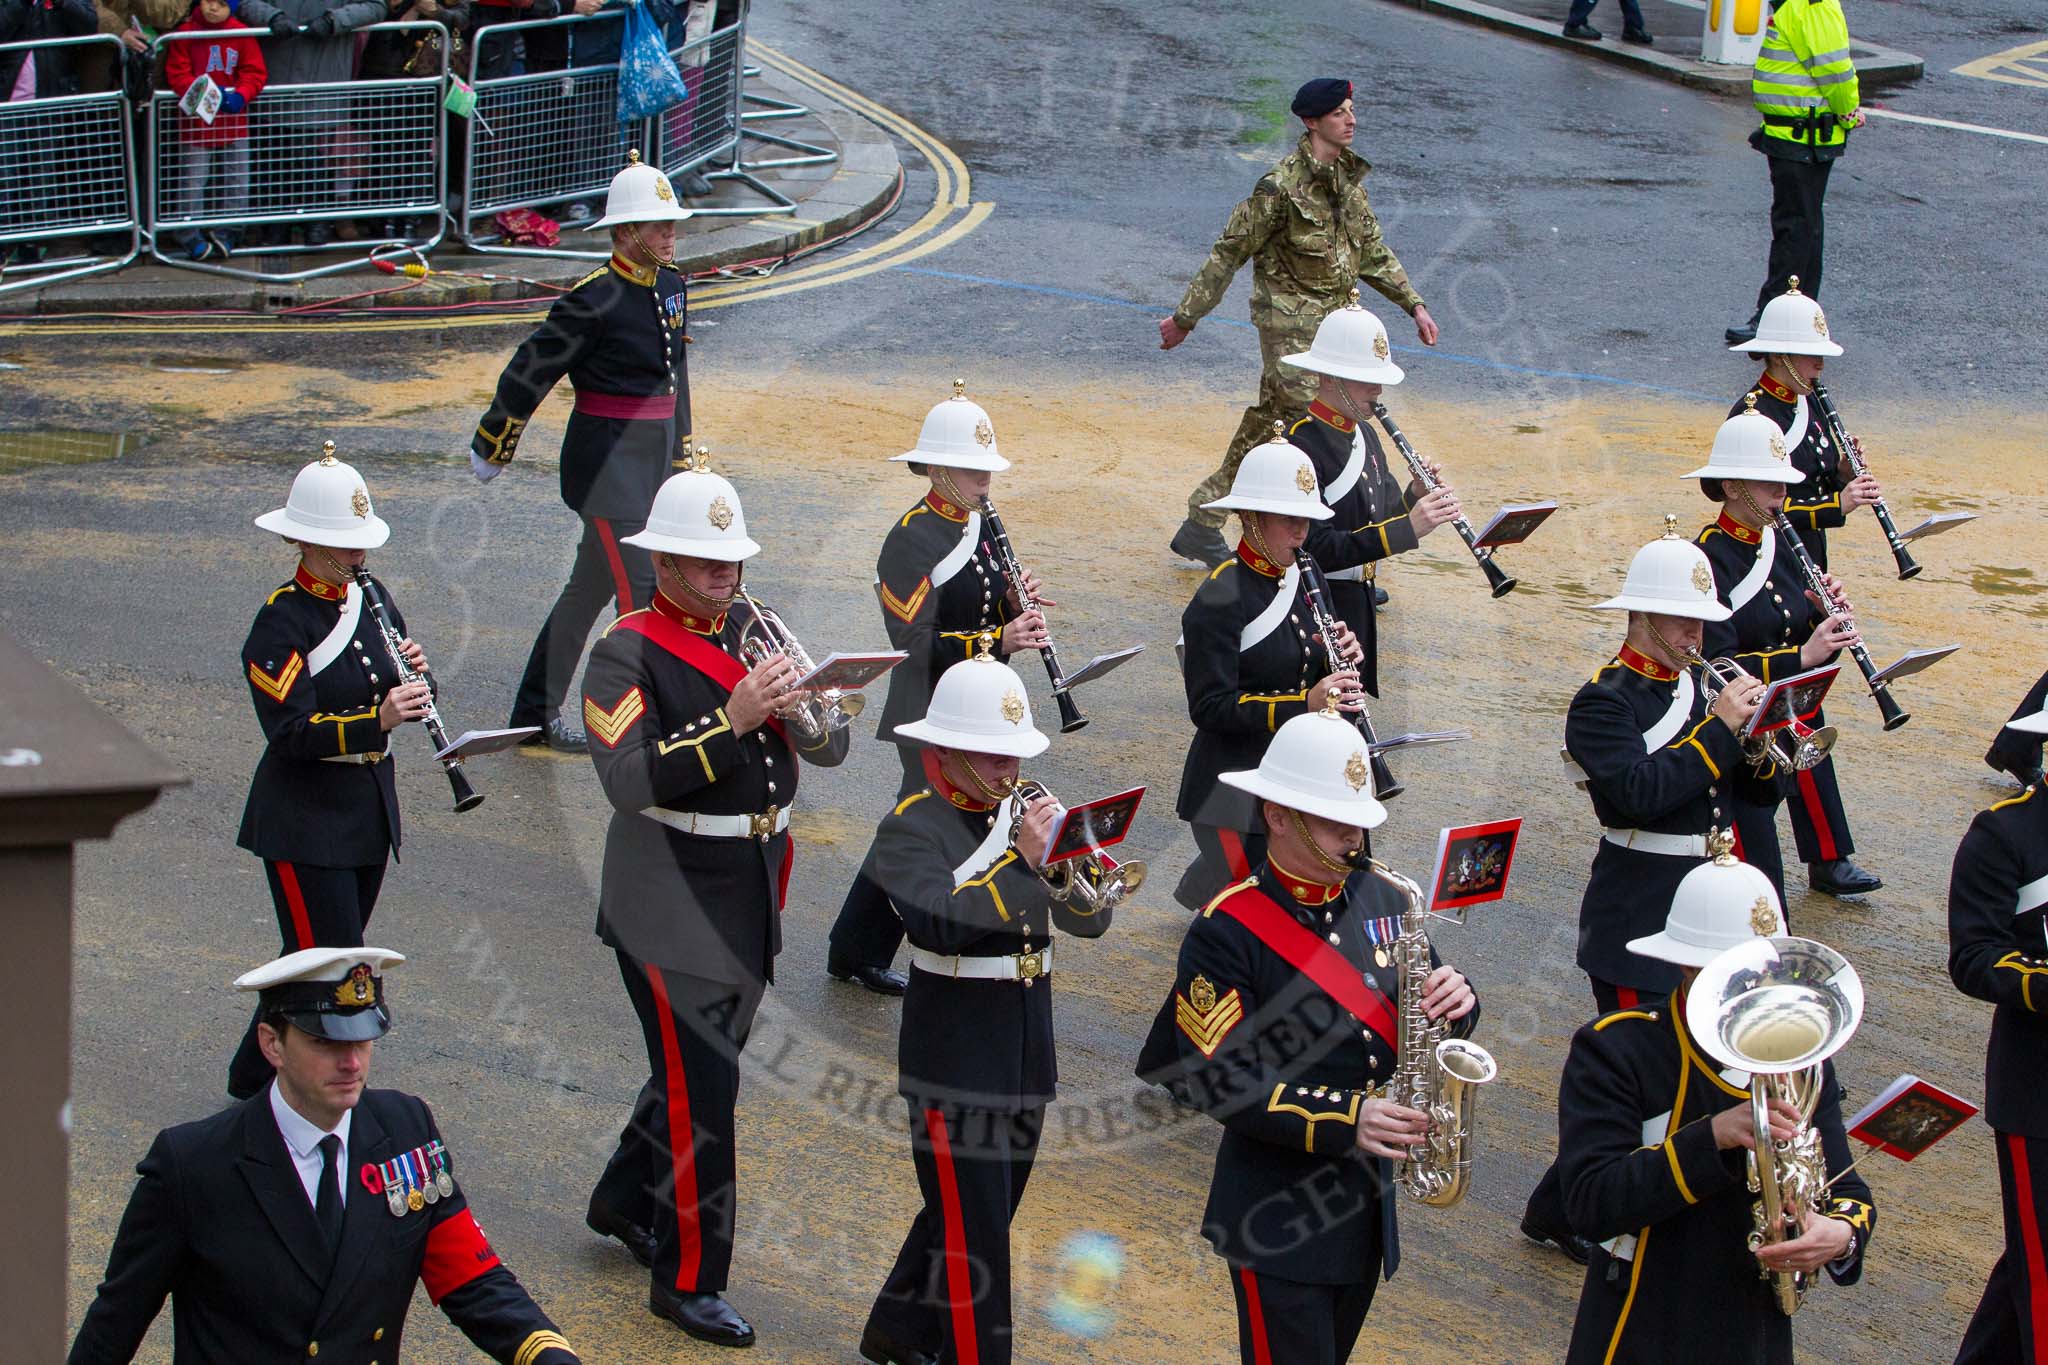 Lord Mayor's Show 2012: Entry 86 - Royal Marines Band (HMS Collingwood)..
Press stand opposite Mansion House, City of London,
London,
Greater London,
United Kingdom,
on 10 November 2012 at 11:38, image #1142